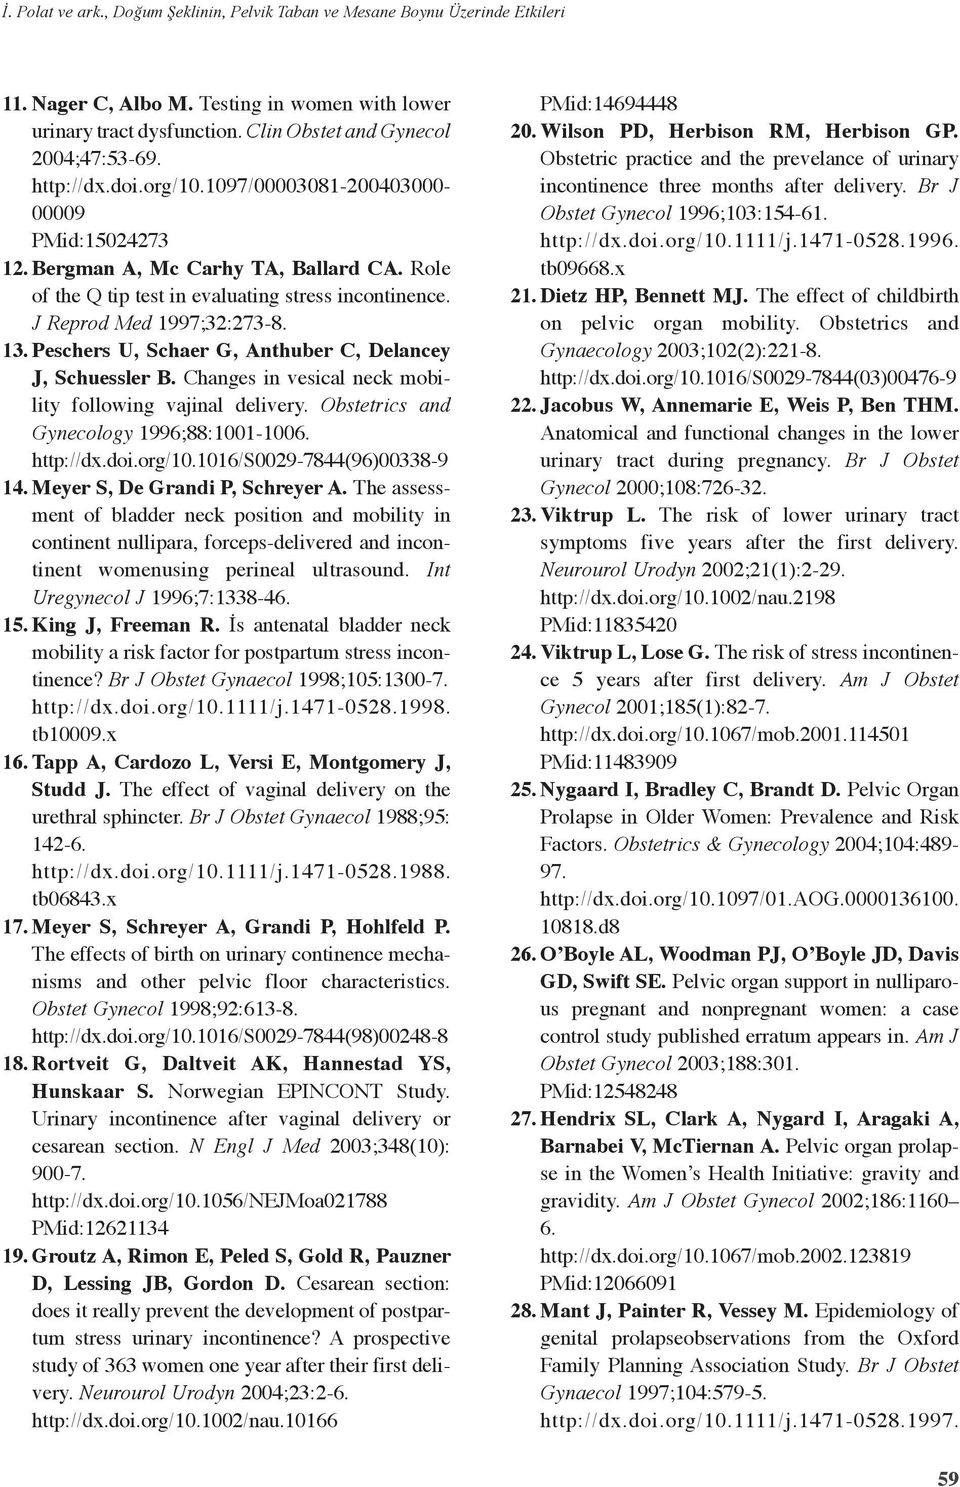 Peschers U, Schaer G, Athuber C, Delacey J, Schuessler B. Chages i vesical eck mobility followig vajial delivery. Obstetrics ad Gyecology 1996;88:11-16. http://dx.doi.org/1.116/s29-7844(96)338-9 14.